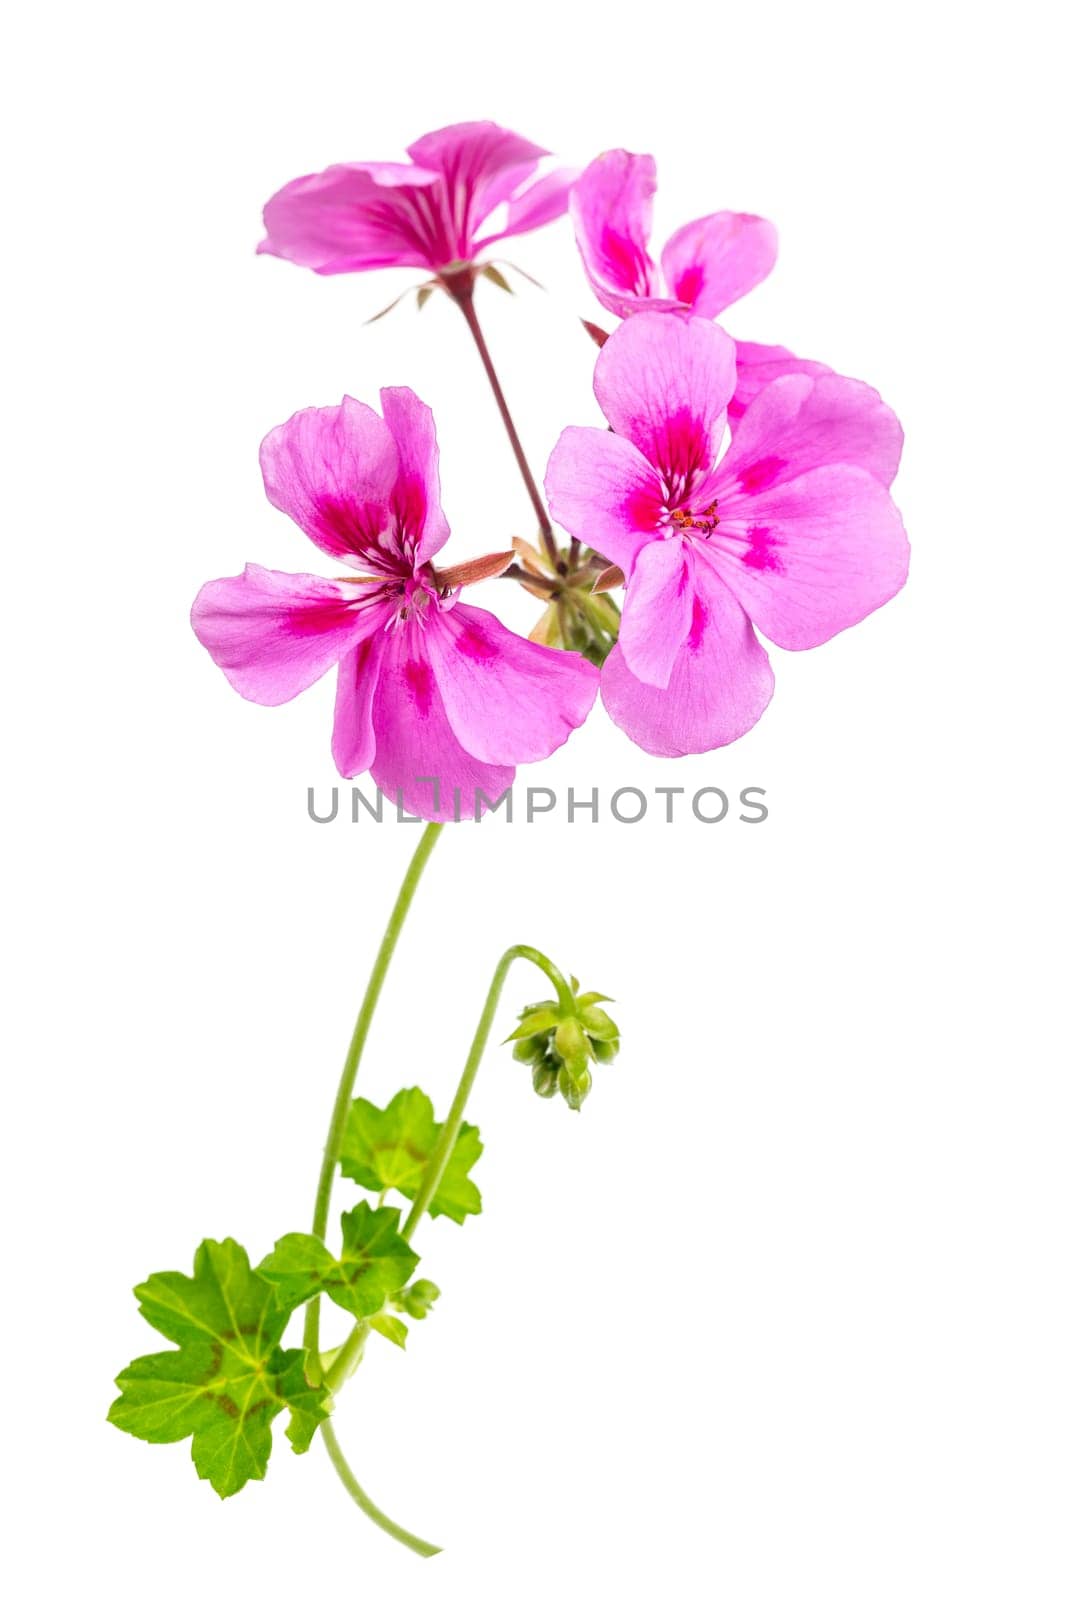 close up pink flowers of rose geranium isolated on a white background by JPC-PROD